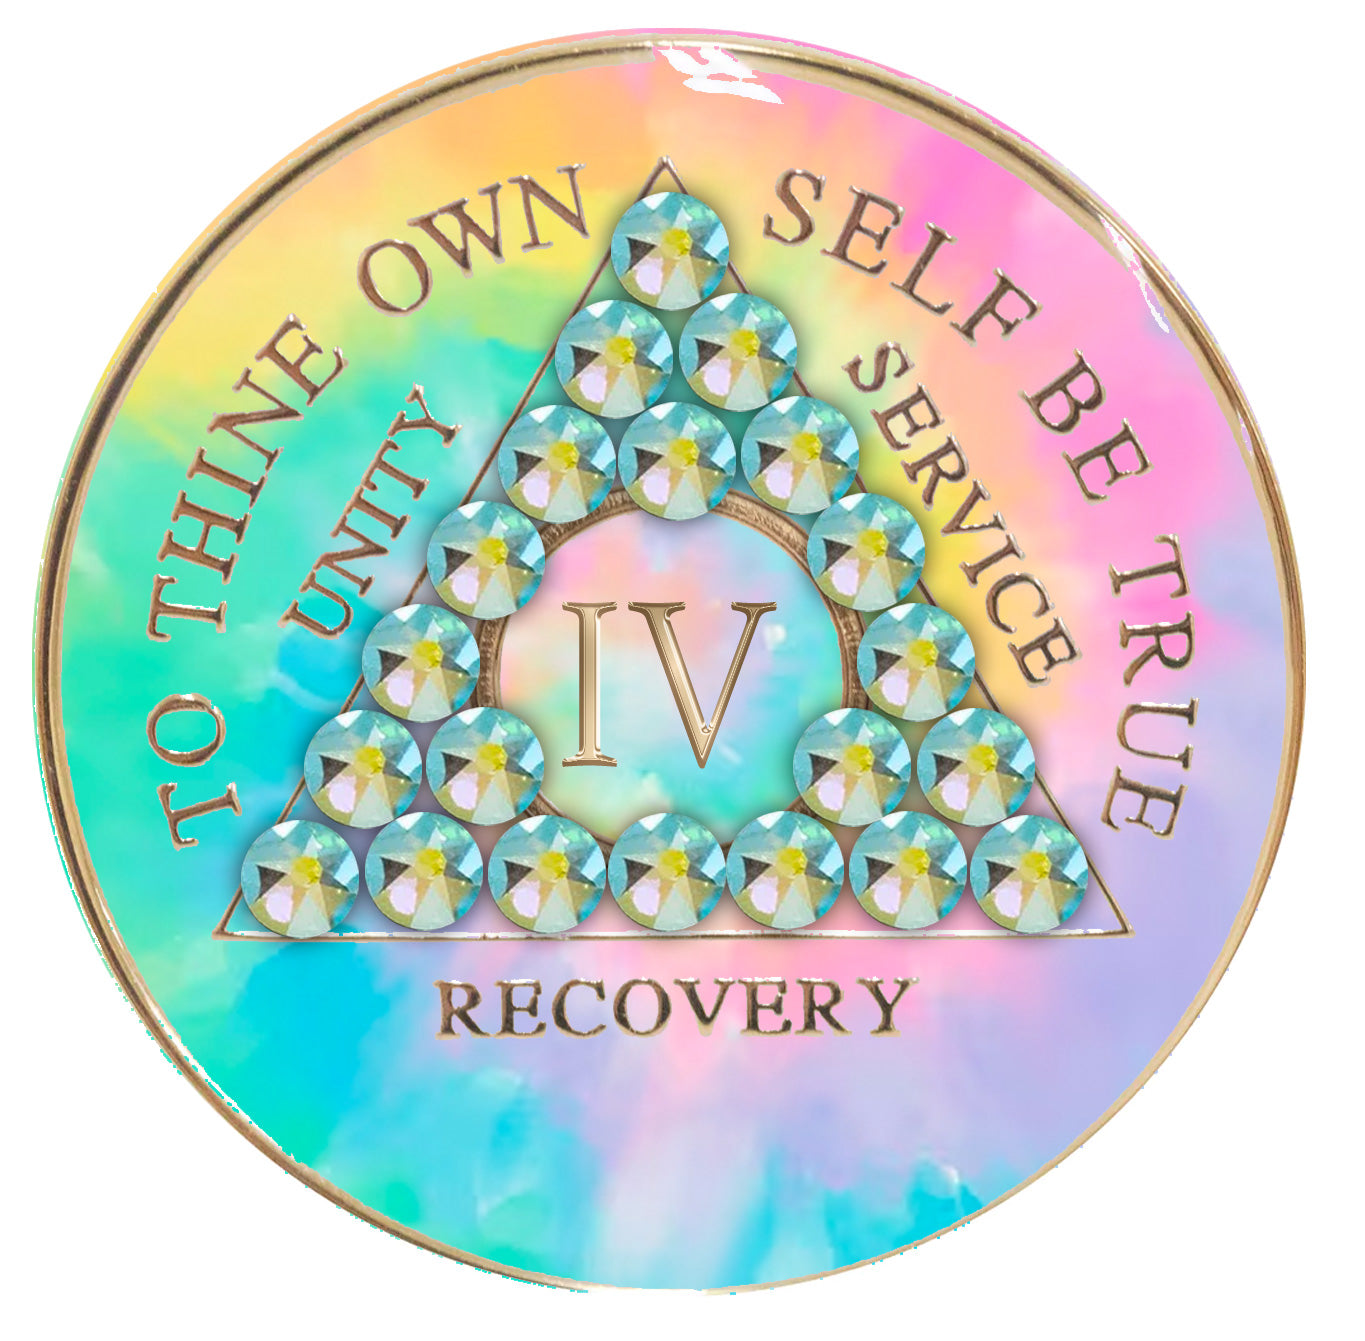 4 year AA medallion pastel tie-dye representing a psychic change that is needed in the recovery journey, with twenty-one Peridot AB genuine crystals, pink, blue, yellow, and green, in the shape of the triangle, with the AA moto and roman numeral embossed in 14k gold-plated brass, the medallion is sealed with resin for a glossy, scratch free finish.